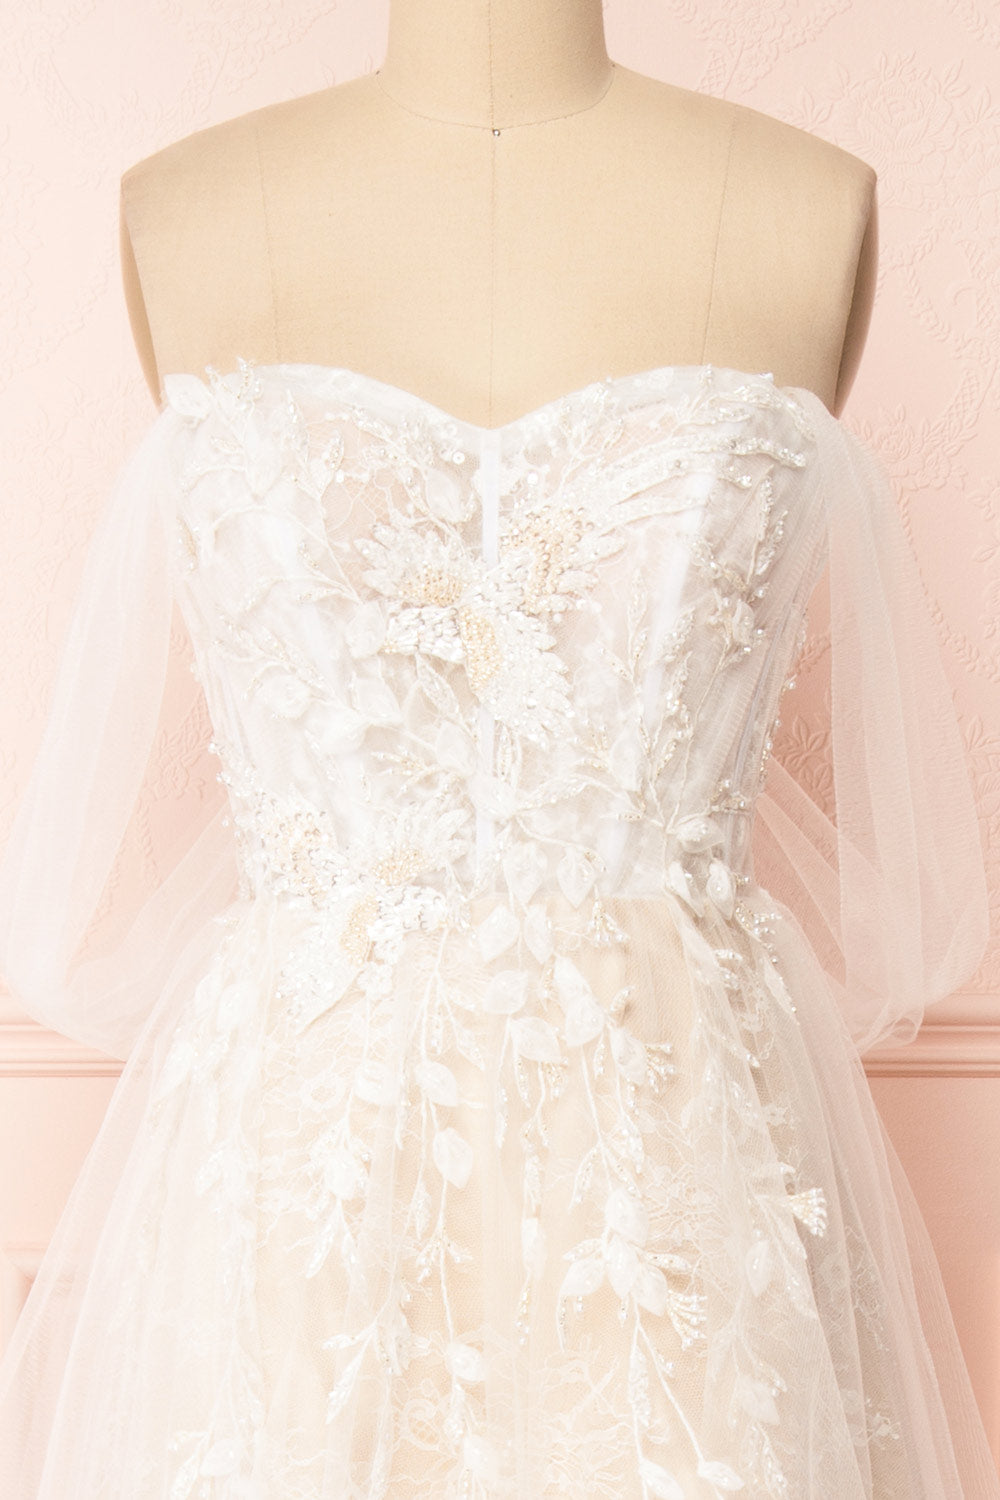 Darana White Embroidered Bustier Bridal Dress | Boudoir 1861 front close-up